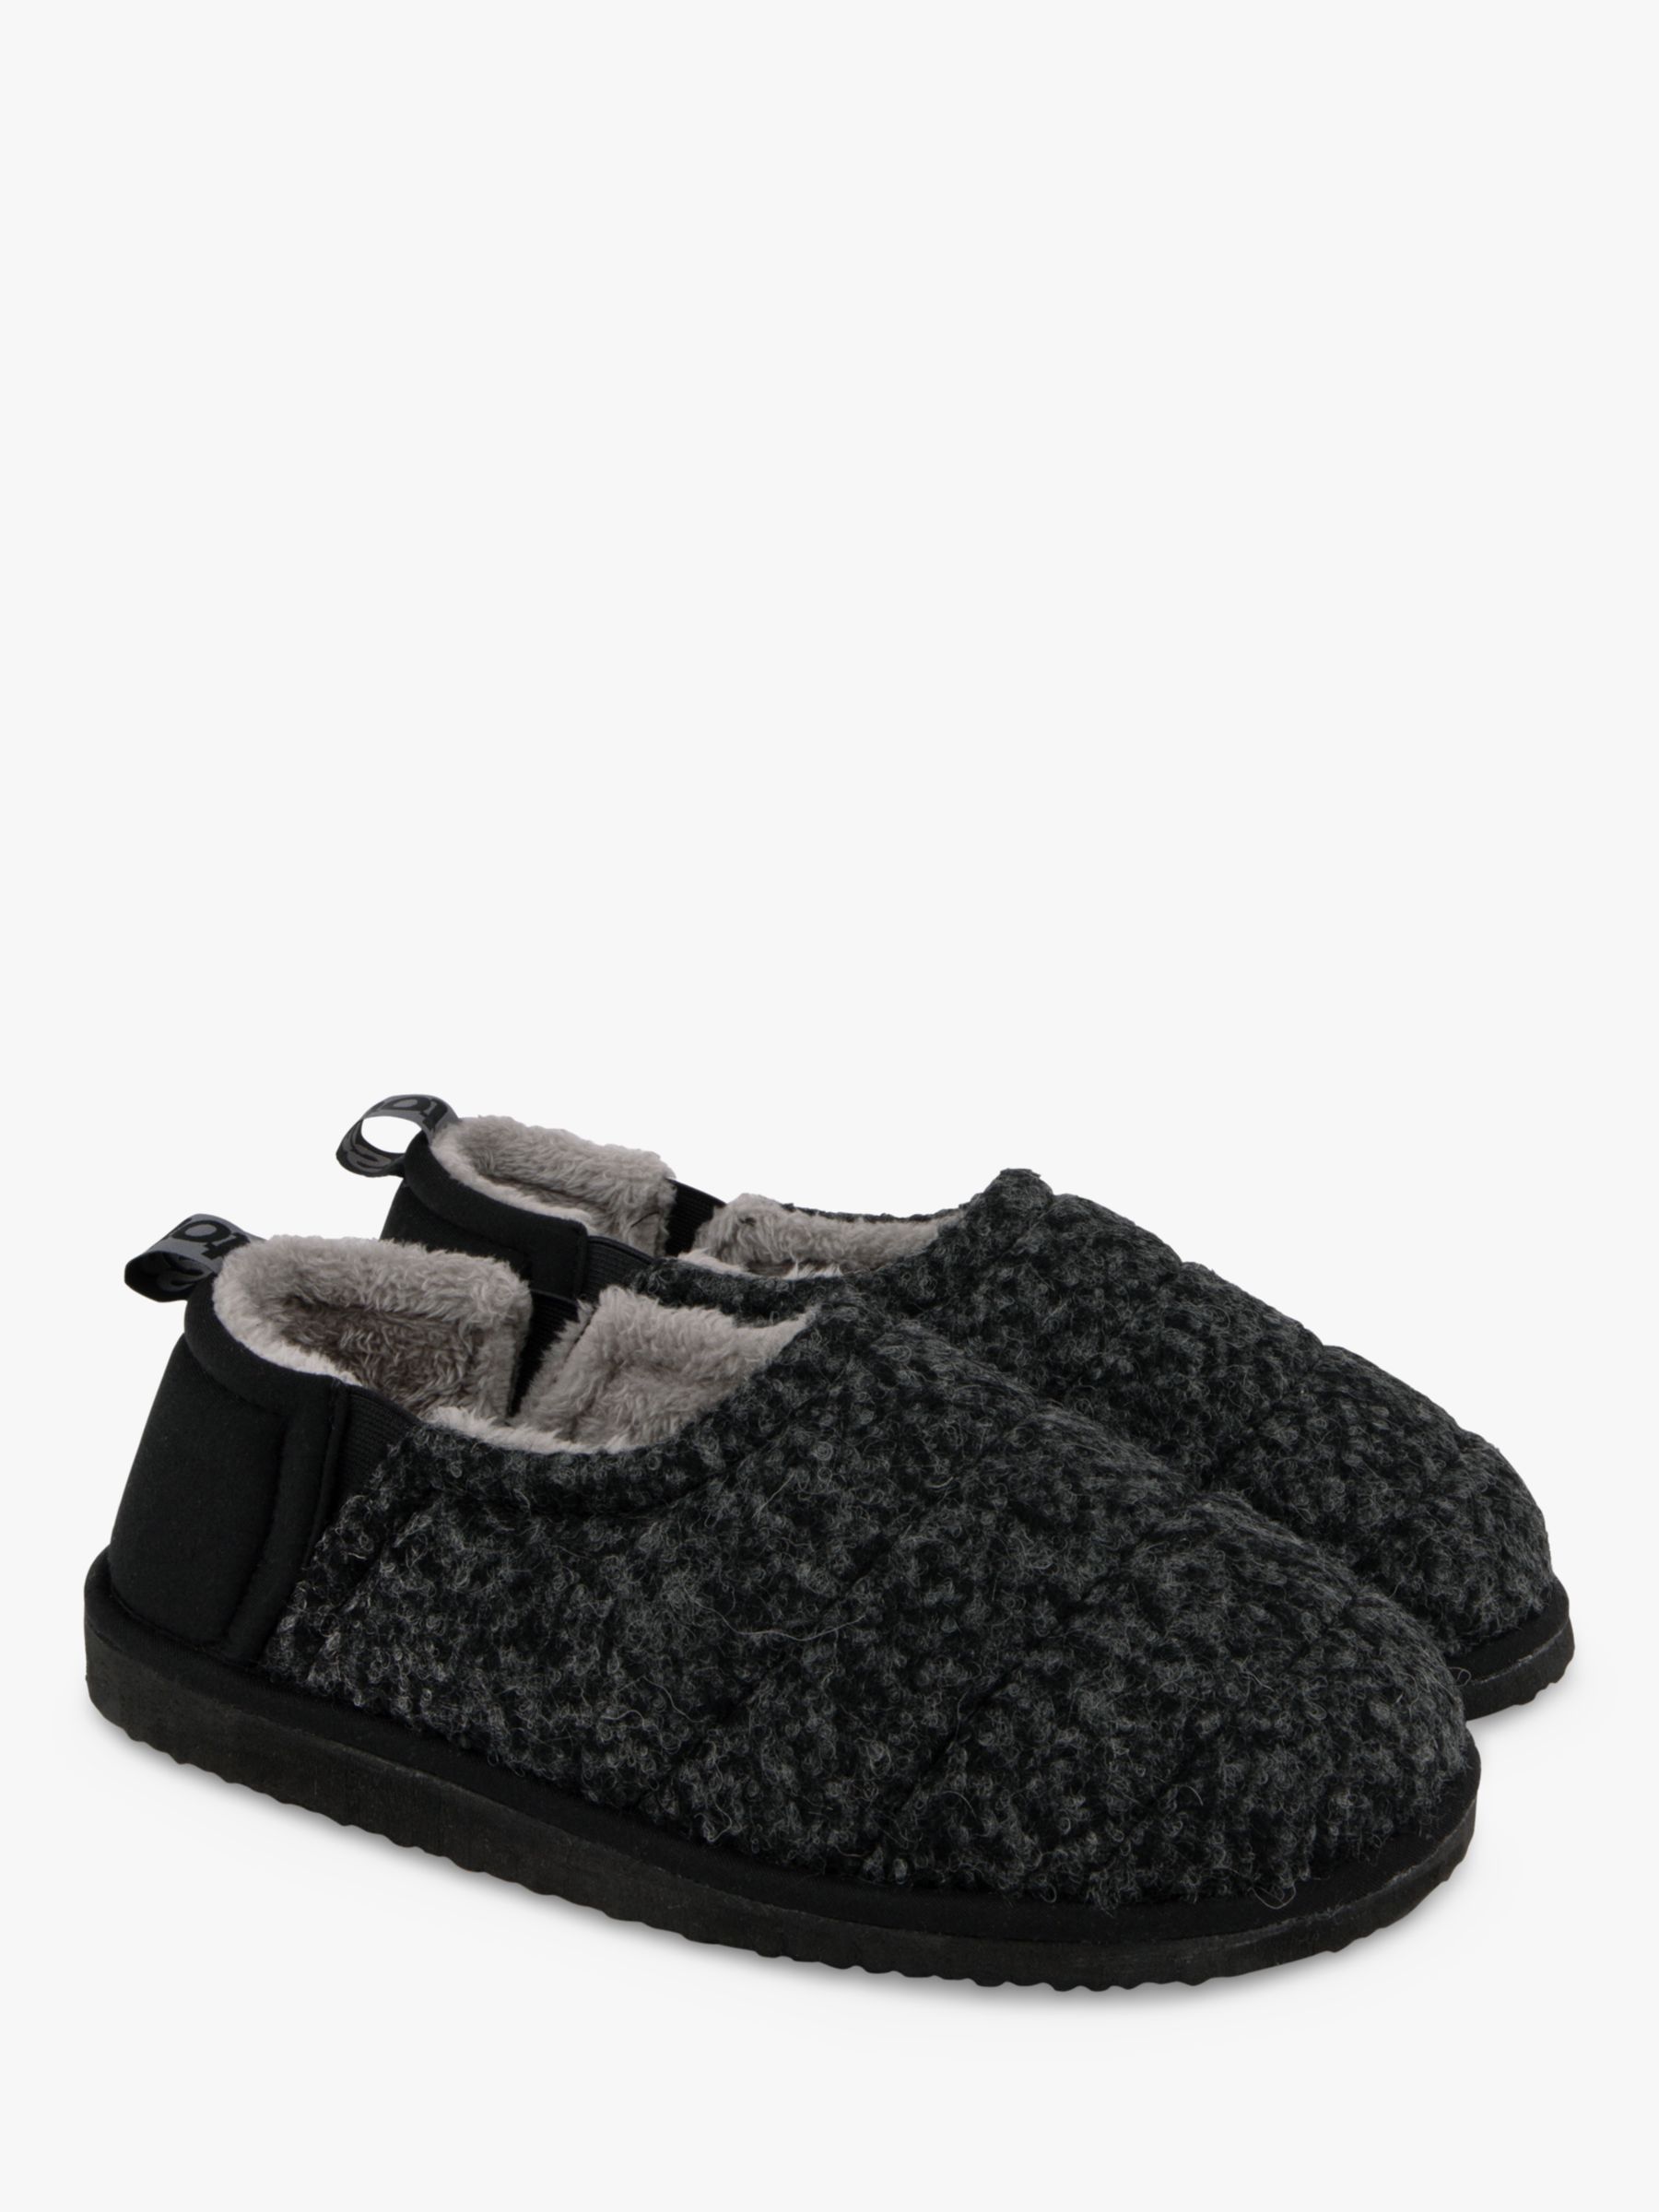 totes Quilted Full Back Slippers, Black, 8